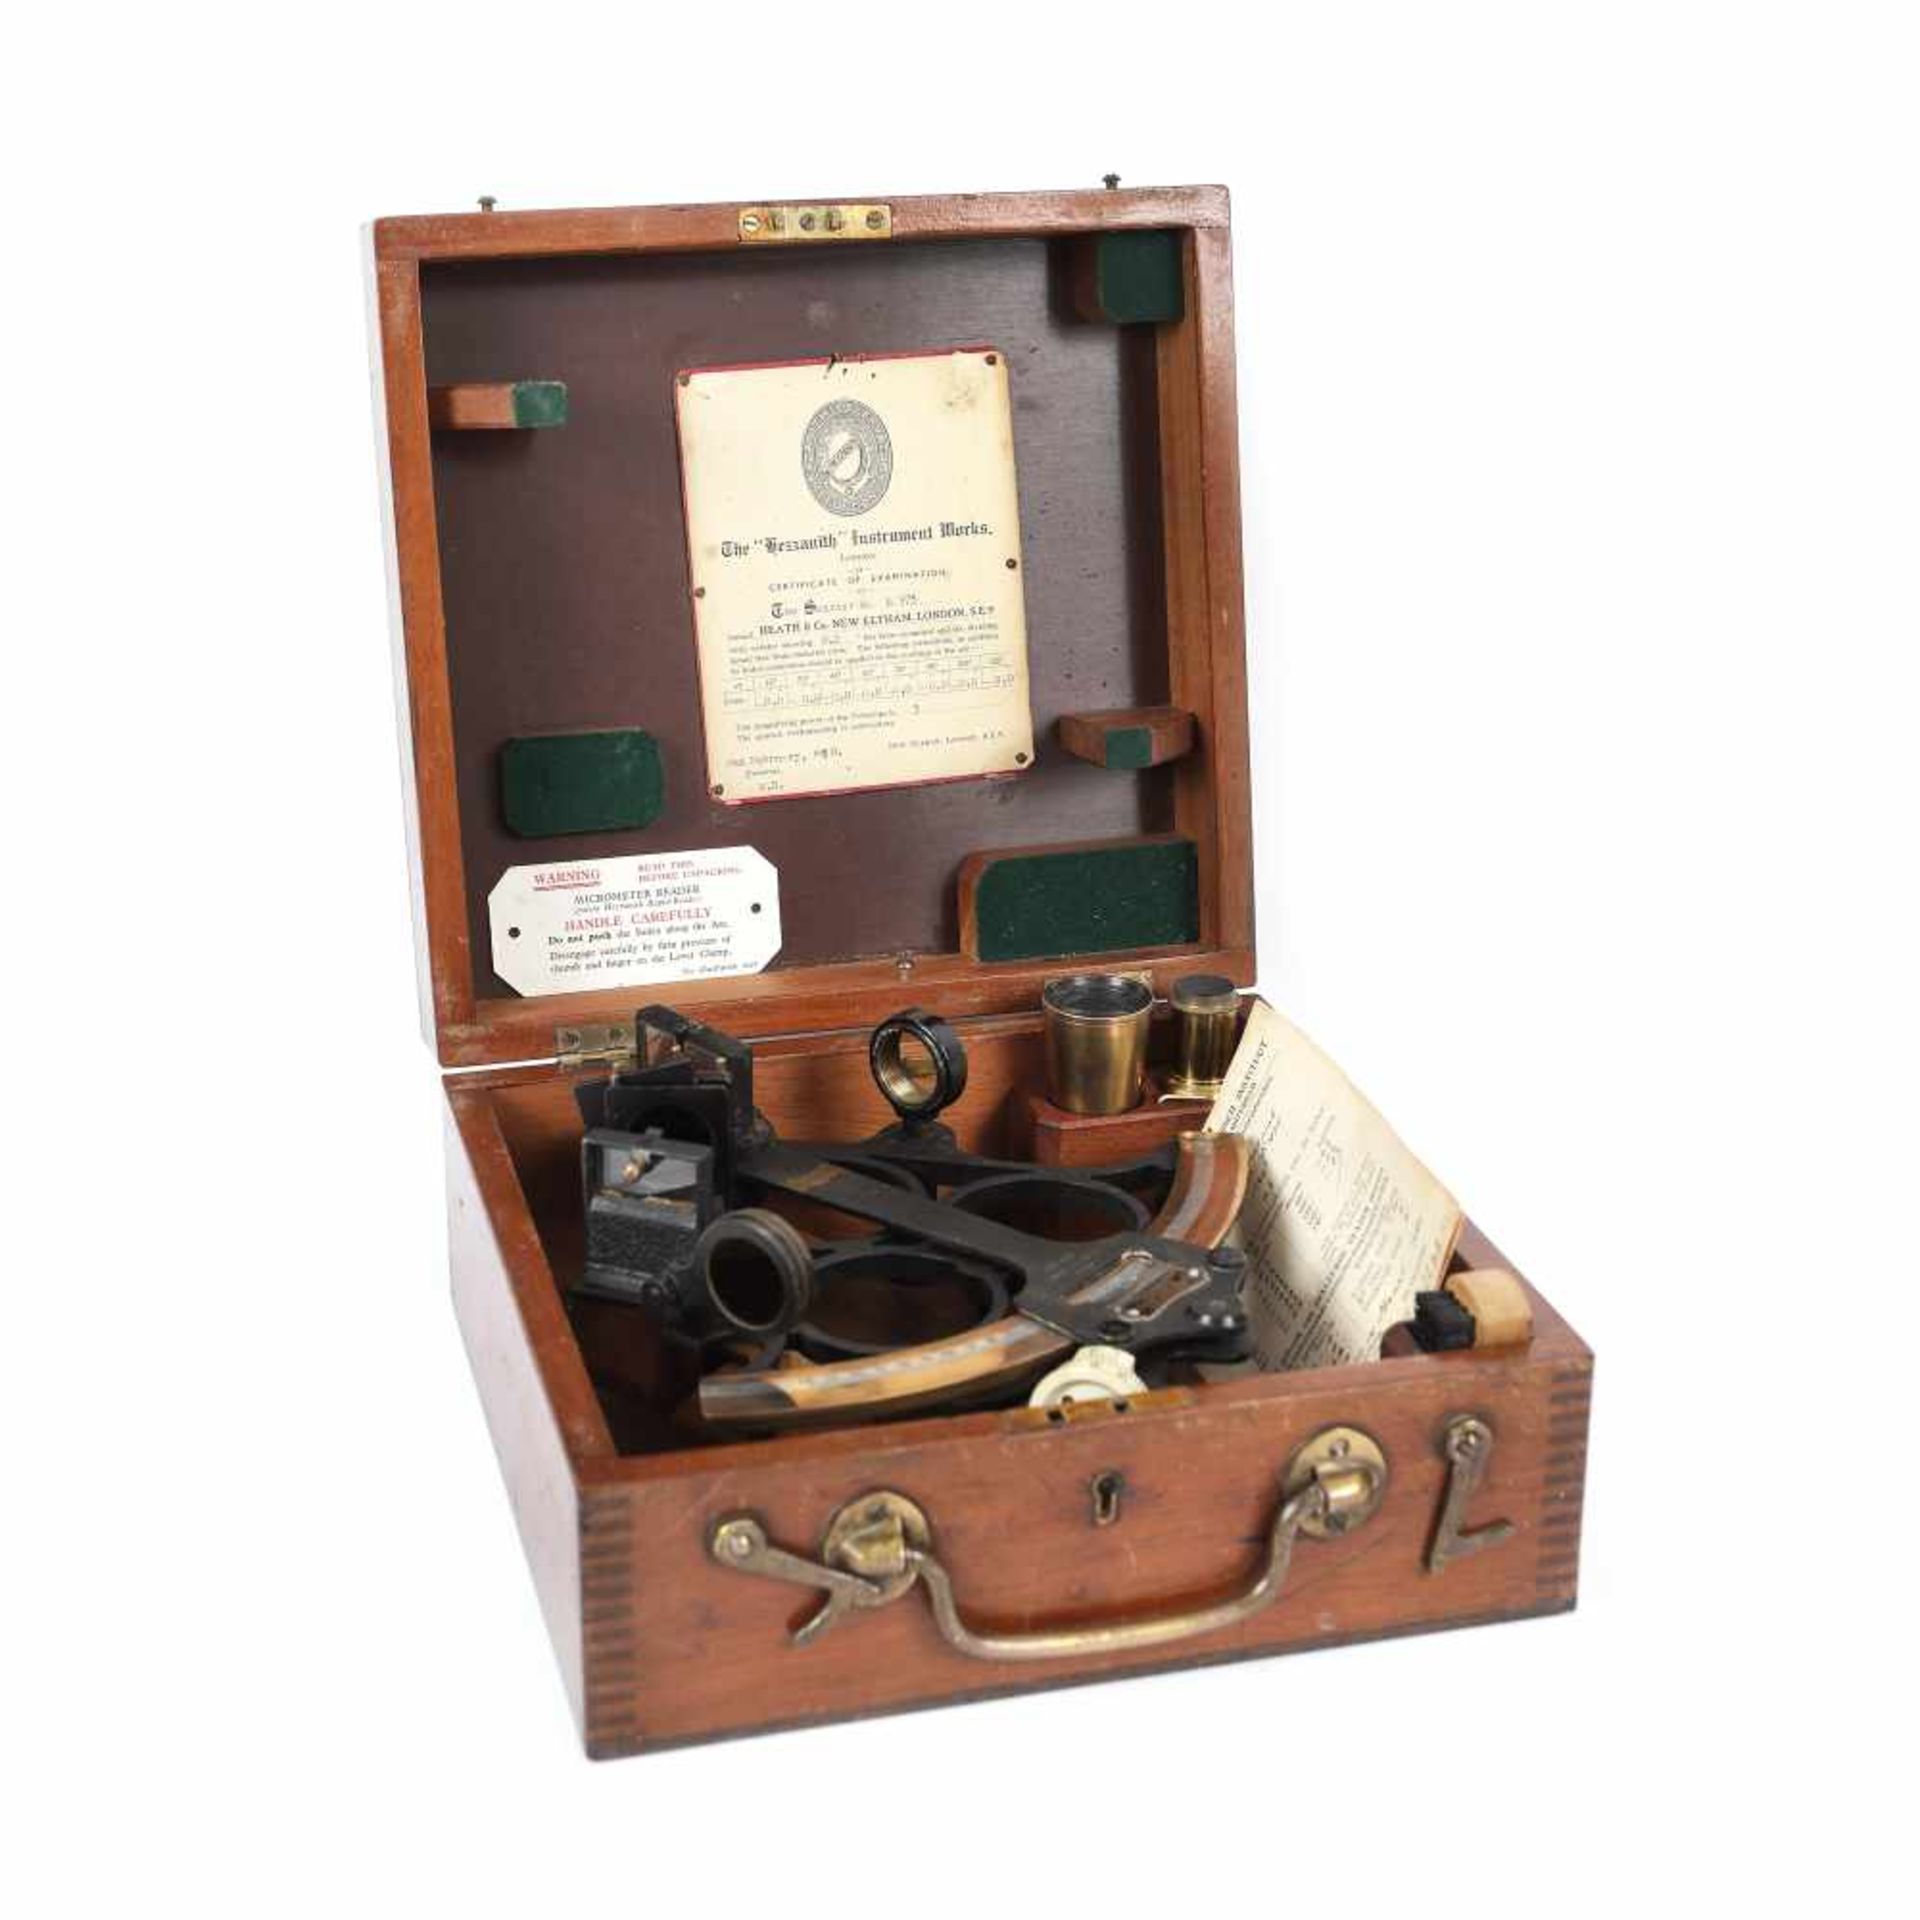 Maritime sextant, Hezzanith, Heath & co., Great Britain, early 20th century, original box - Image 2 of 3